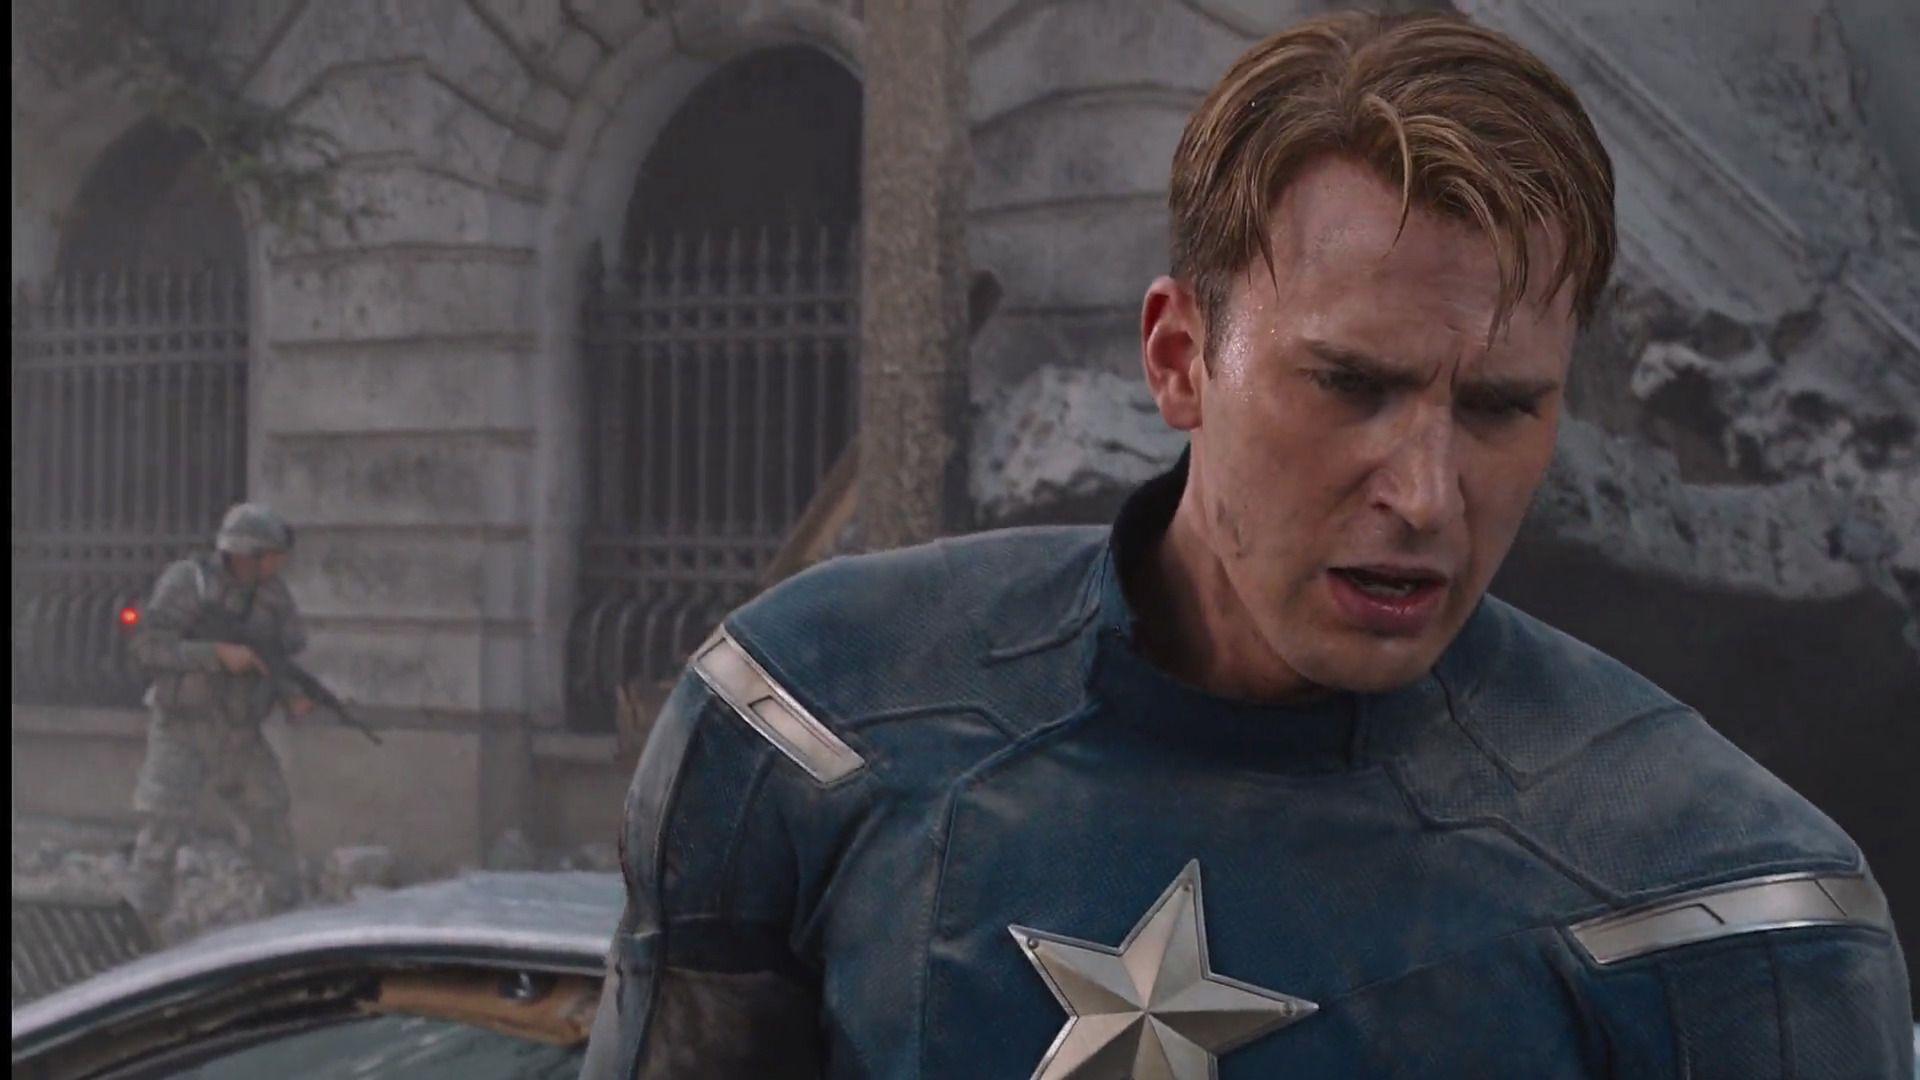 How Well Do You Know Captain America?